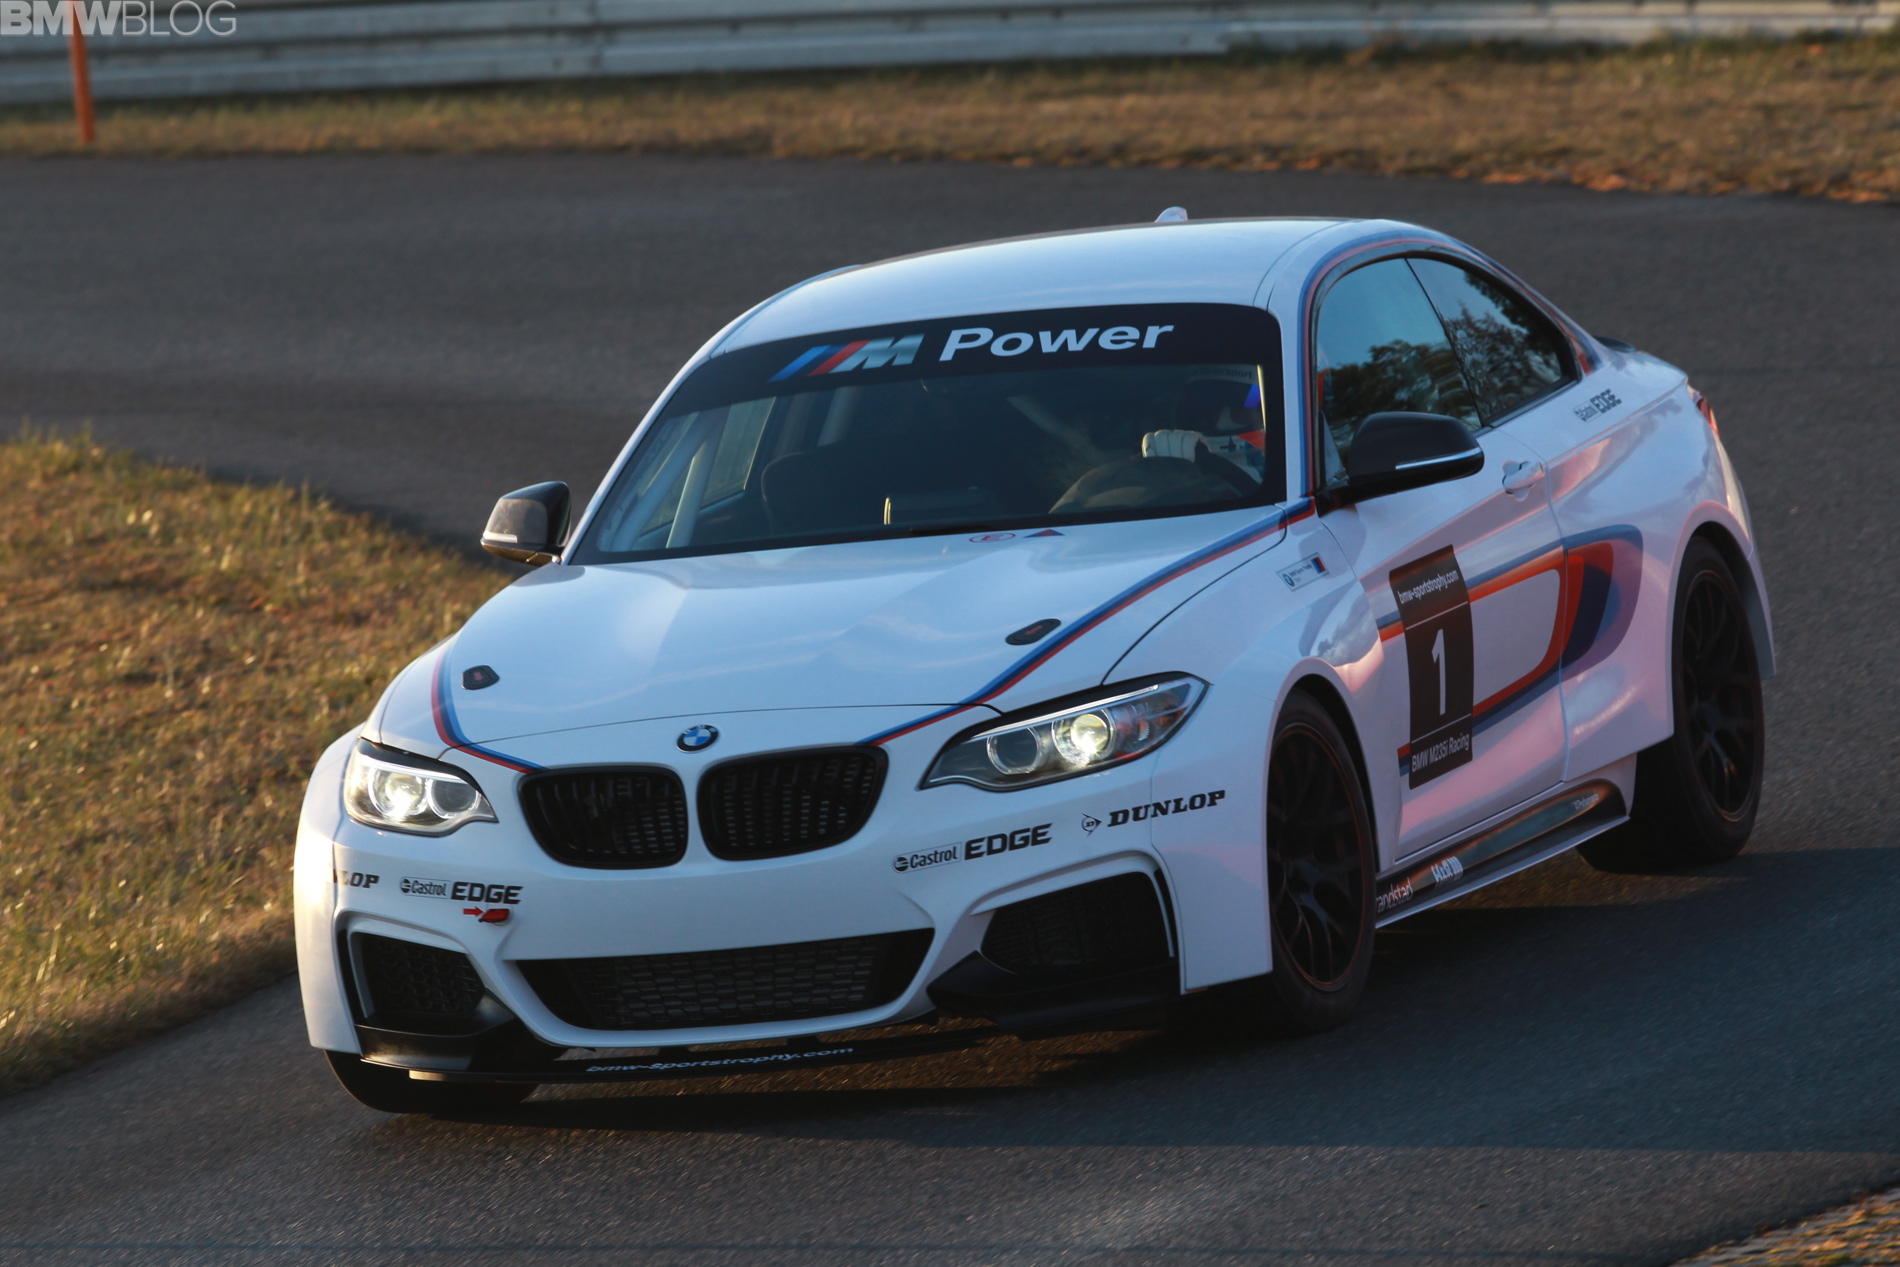 Bmw picture racing #1